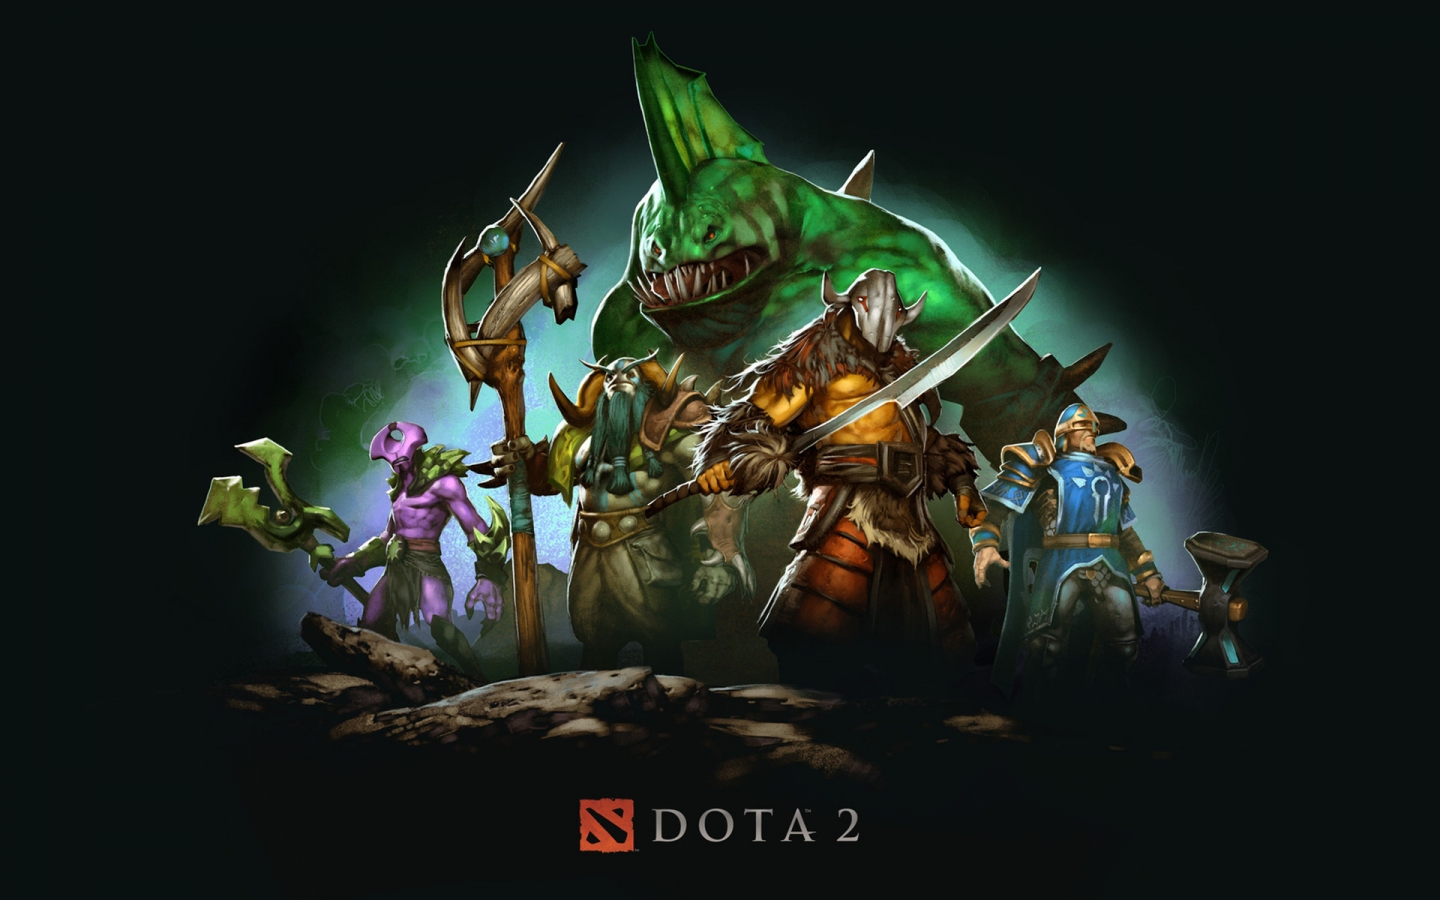 Dota 2 Characters for 1440 x 900 widescreen resolution